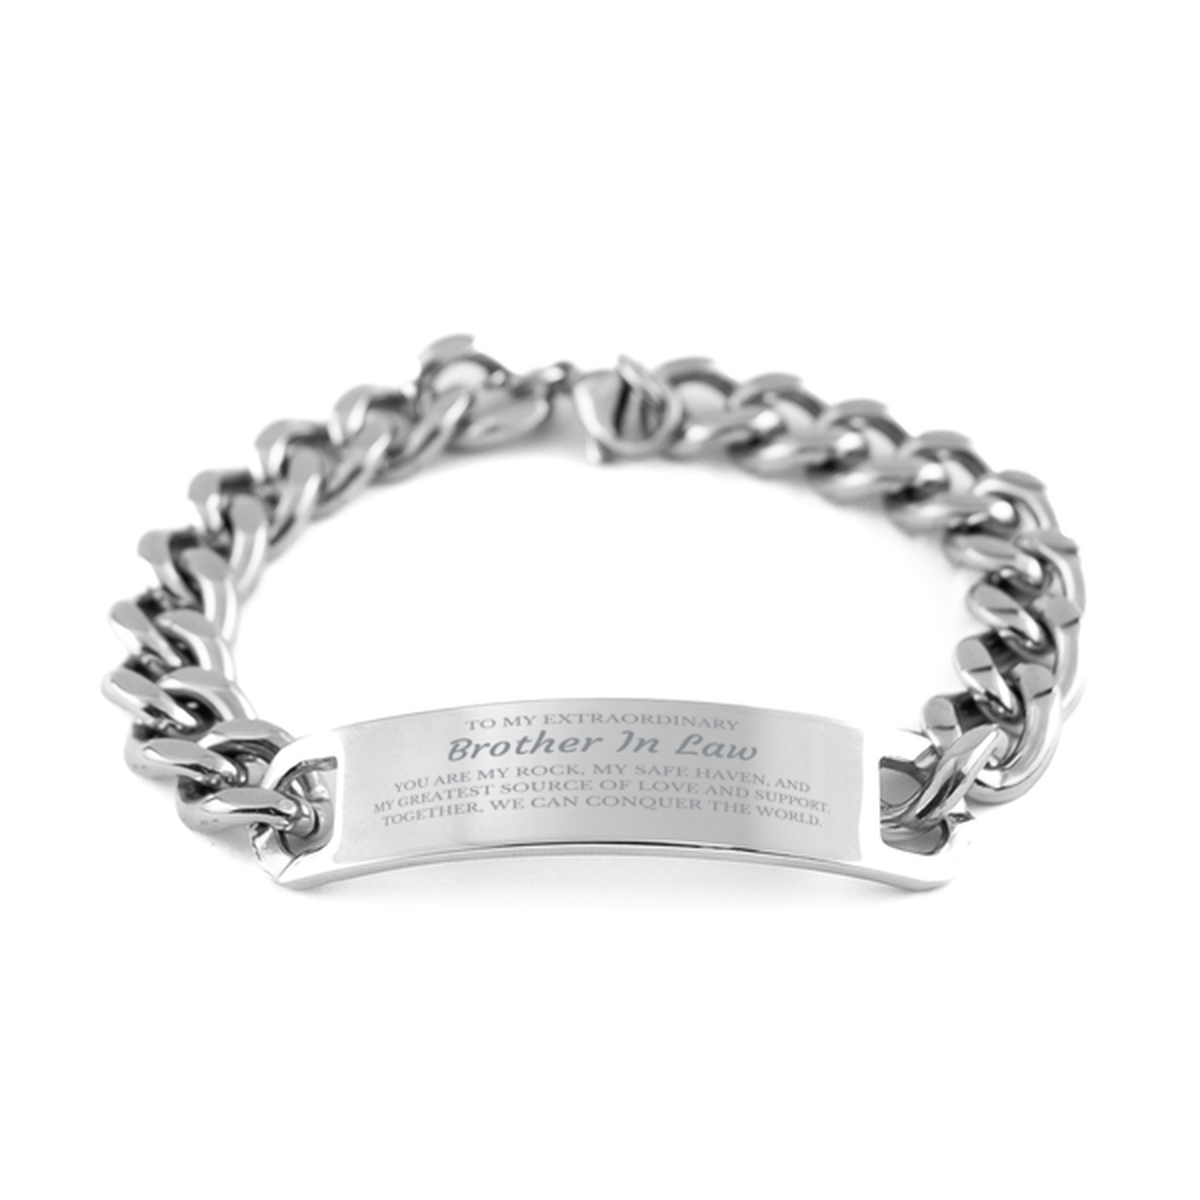 To My Extraordinary Brother In Law Gifts, Together, we can conquer the world, Birthday Cuban Chain Stainless Steel Bracelet For Brother In Law, Christmas Gifts For Brother In Law